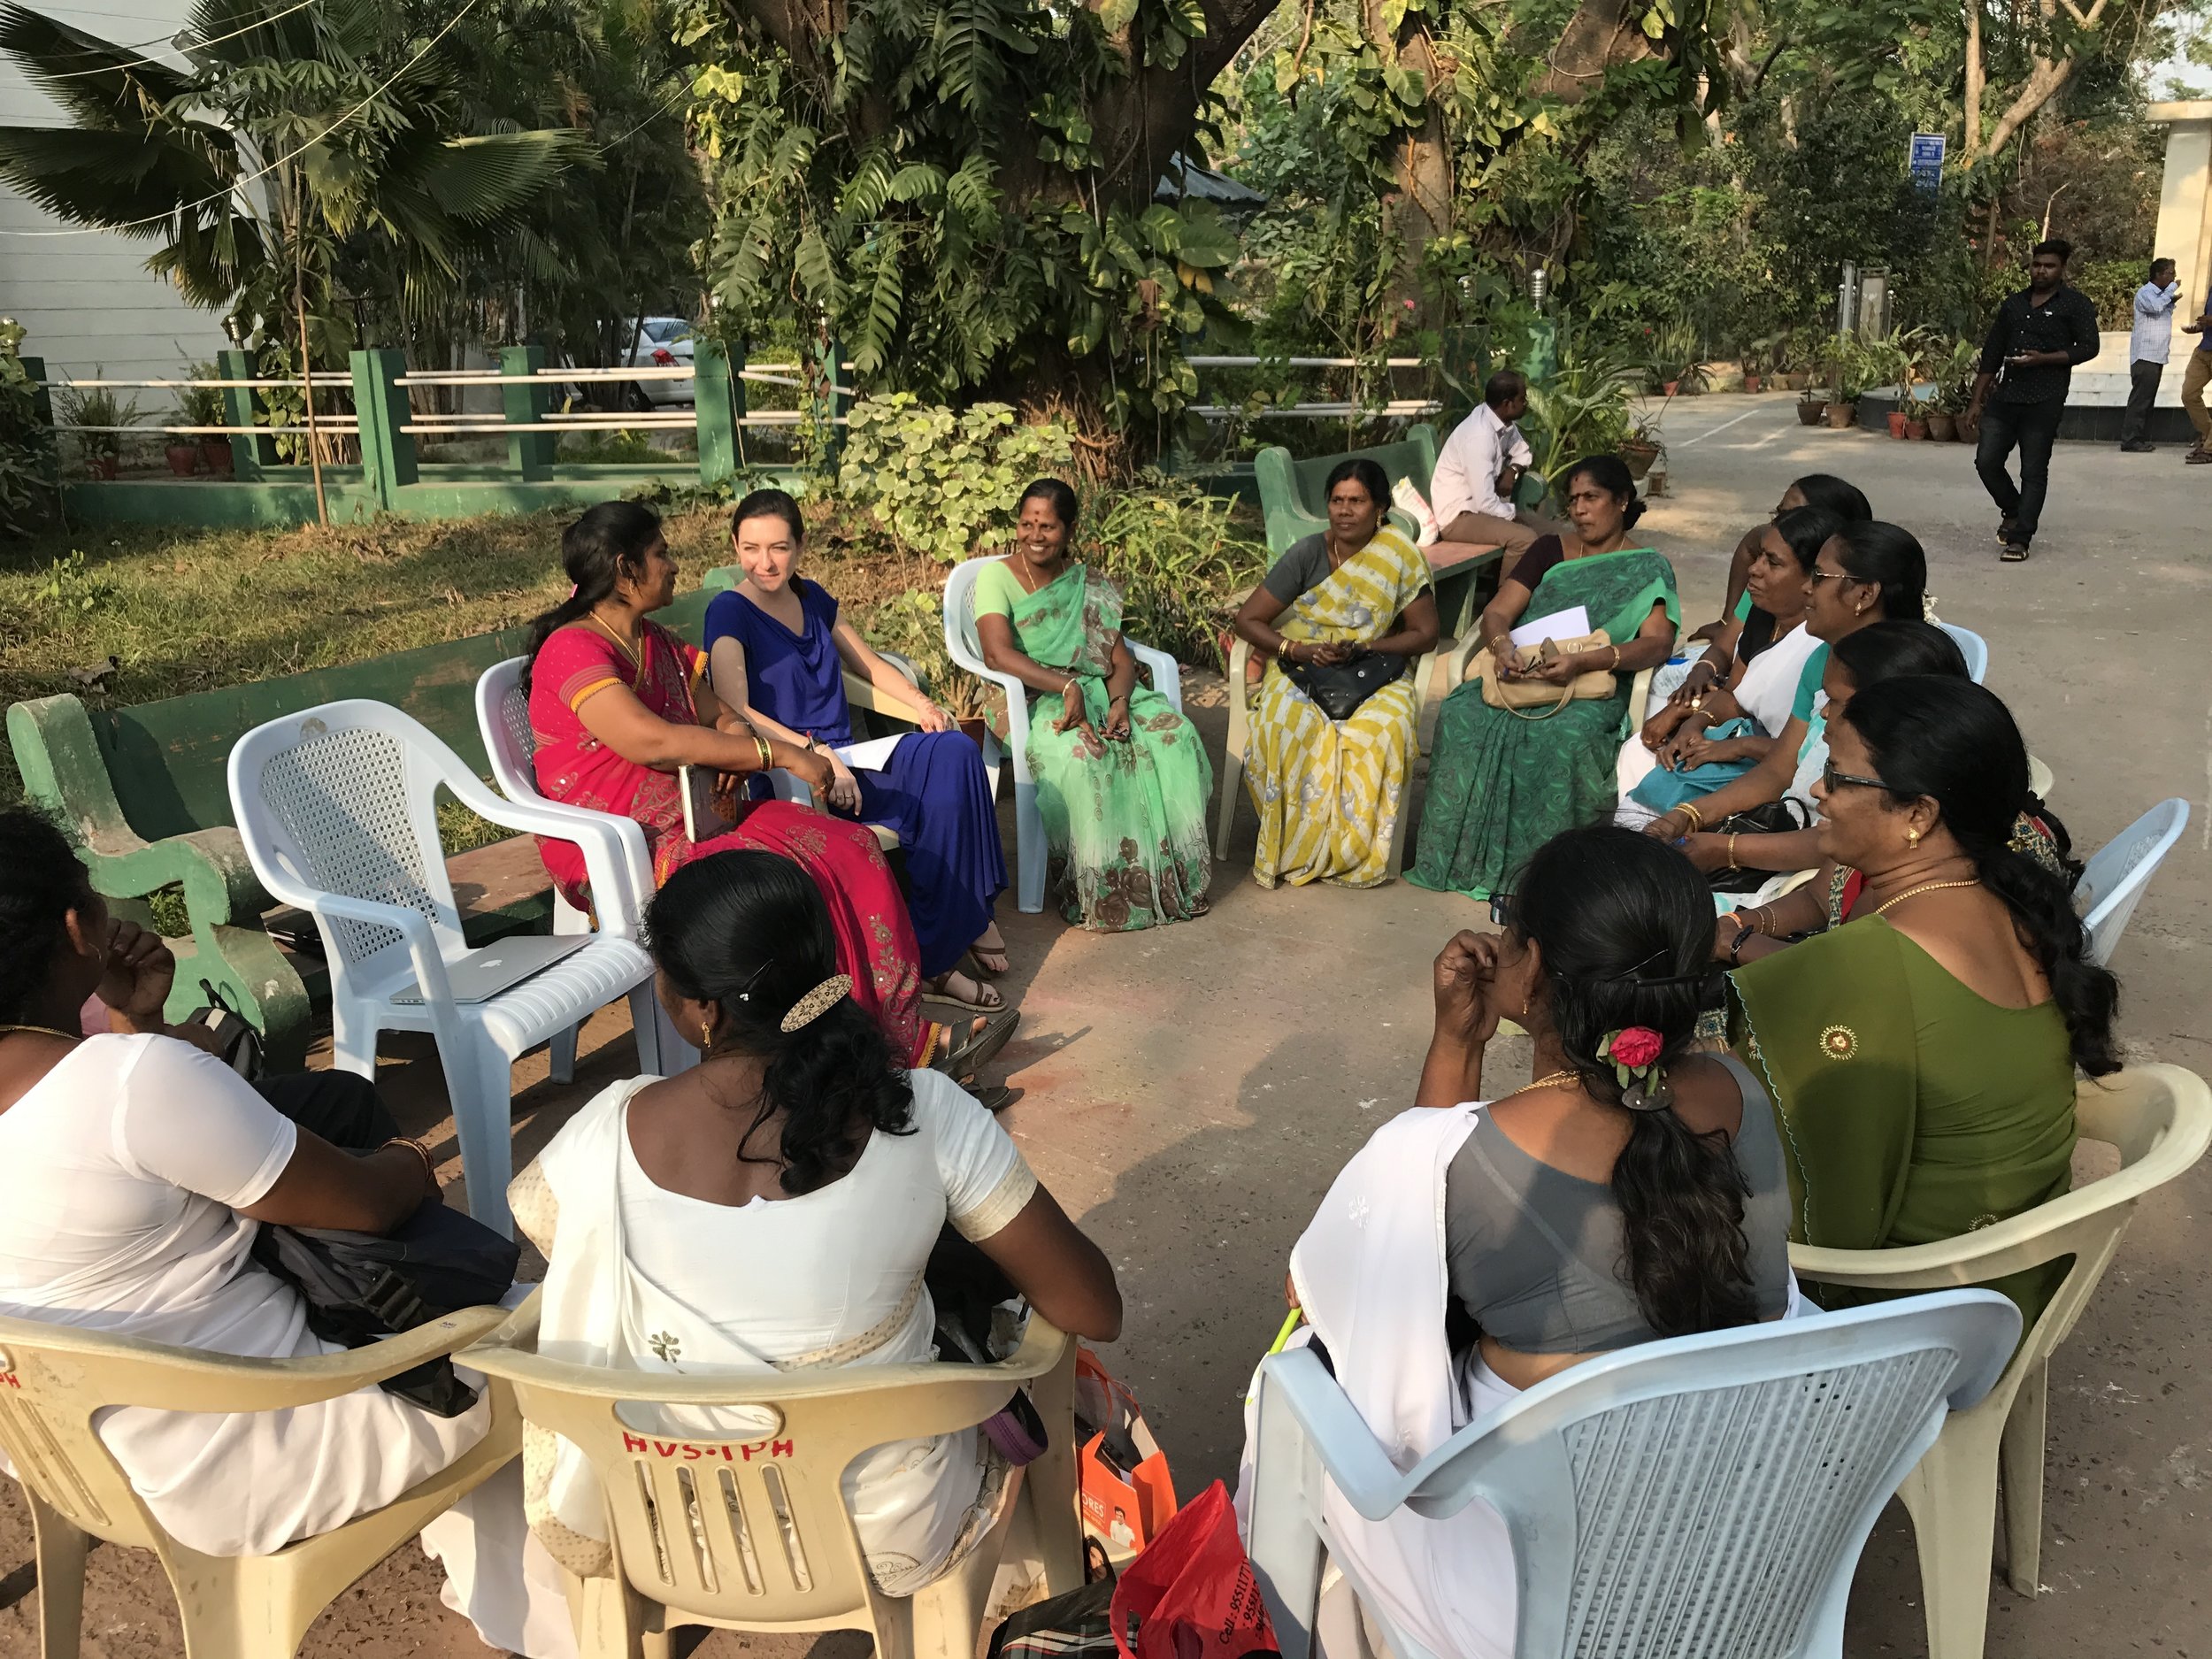  Chennai, India IDEV Practicum Team member Rose Fishman (second from left) conducts a focus group with VHNs at the Poonamallee IPH, assisted by Ms. Eswari (left). Focus groups were conducted toward the end of fieldwork to validate findings and to dis